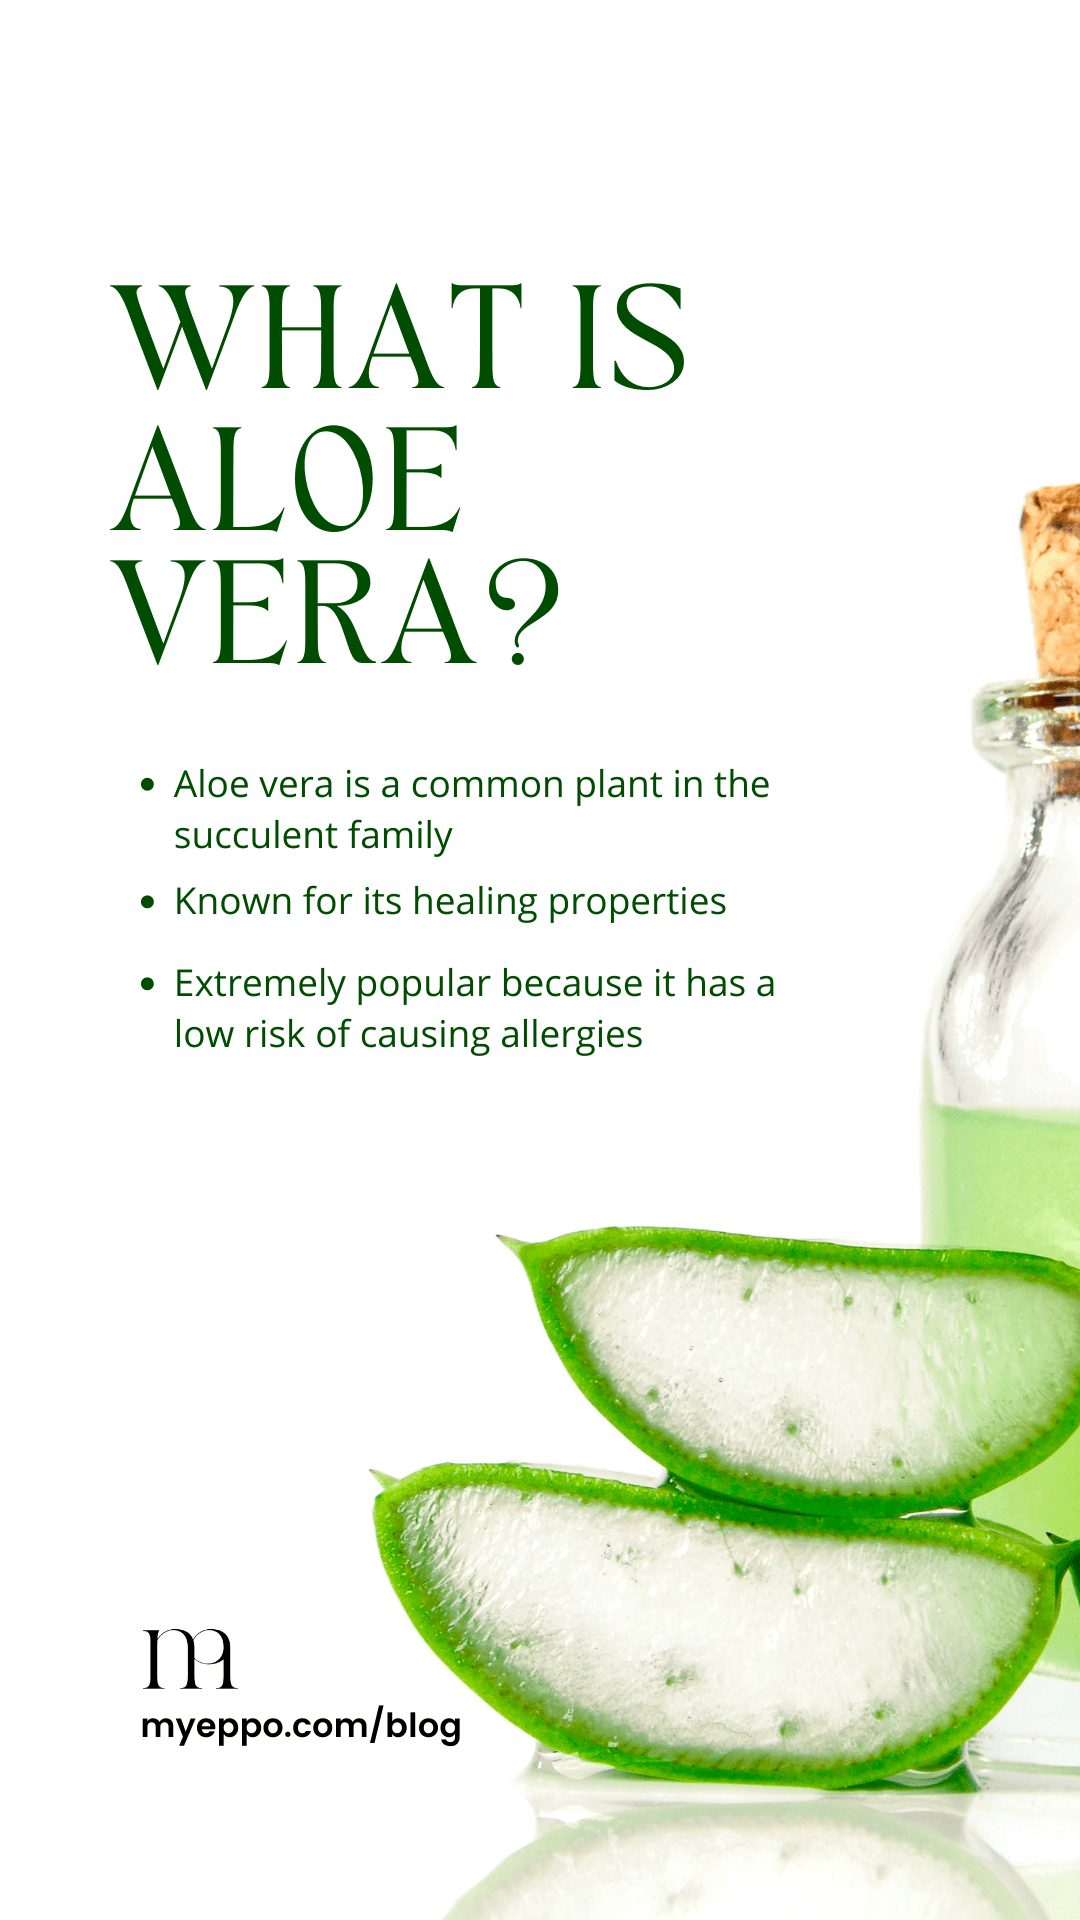 podning Blive gift Outlook Can Aloe Vera Get Rid Of Acne Scars? | myeppo.